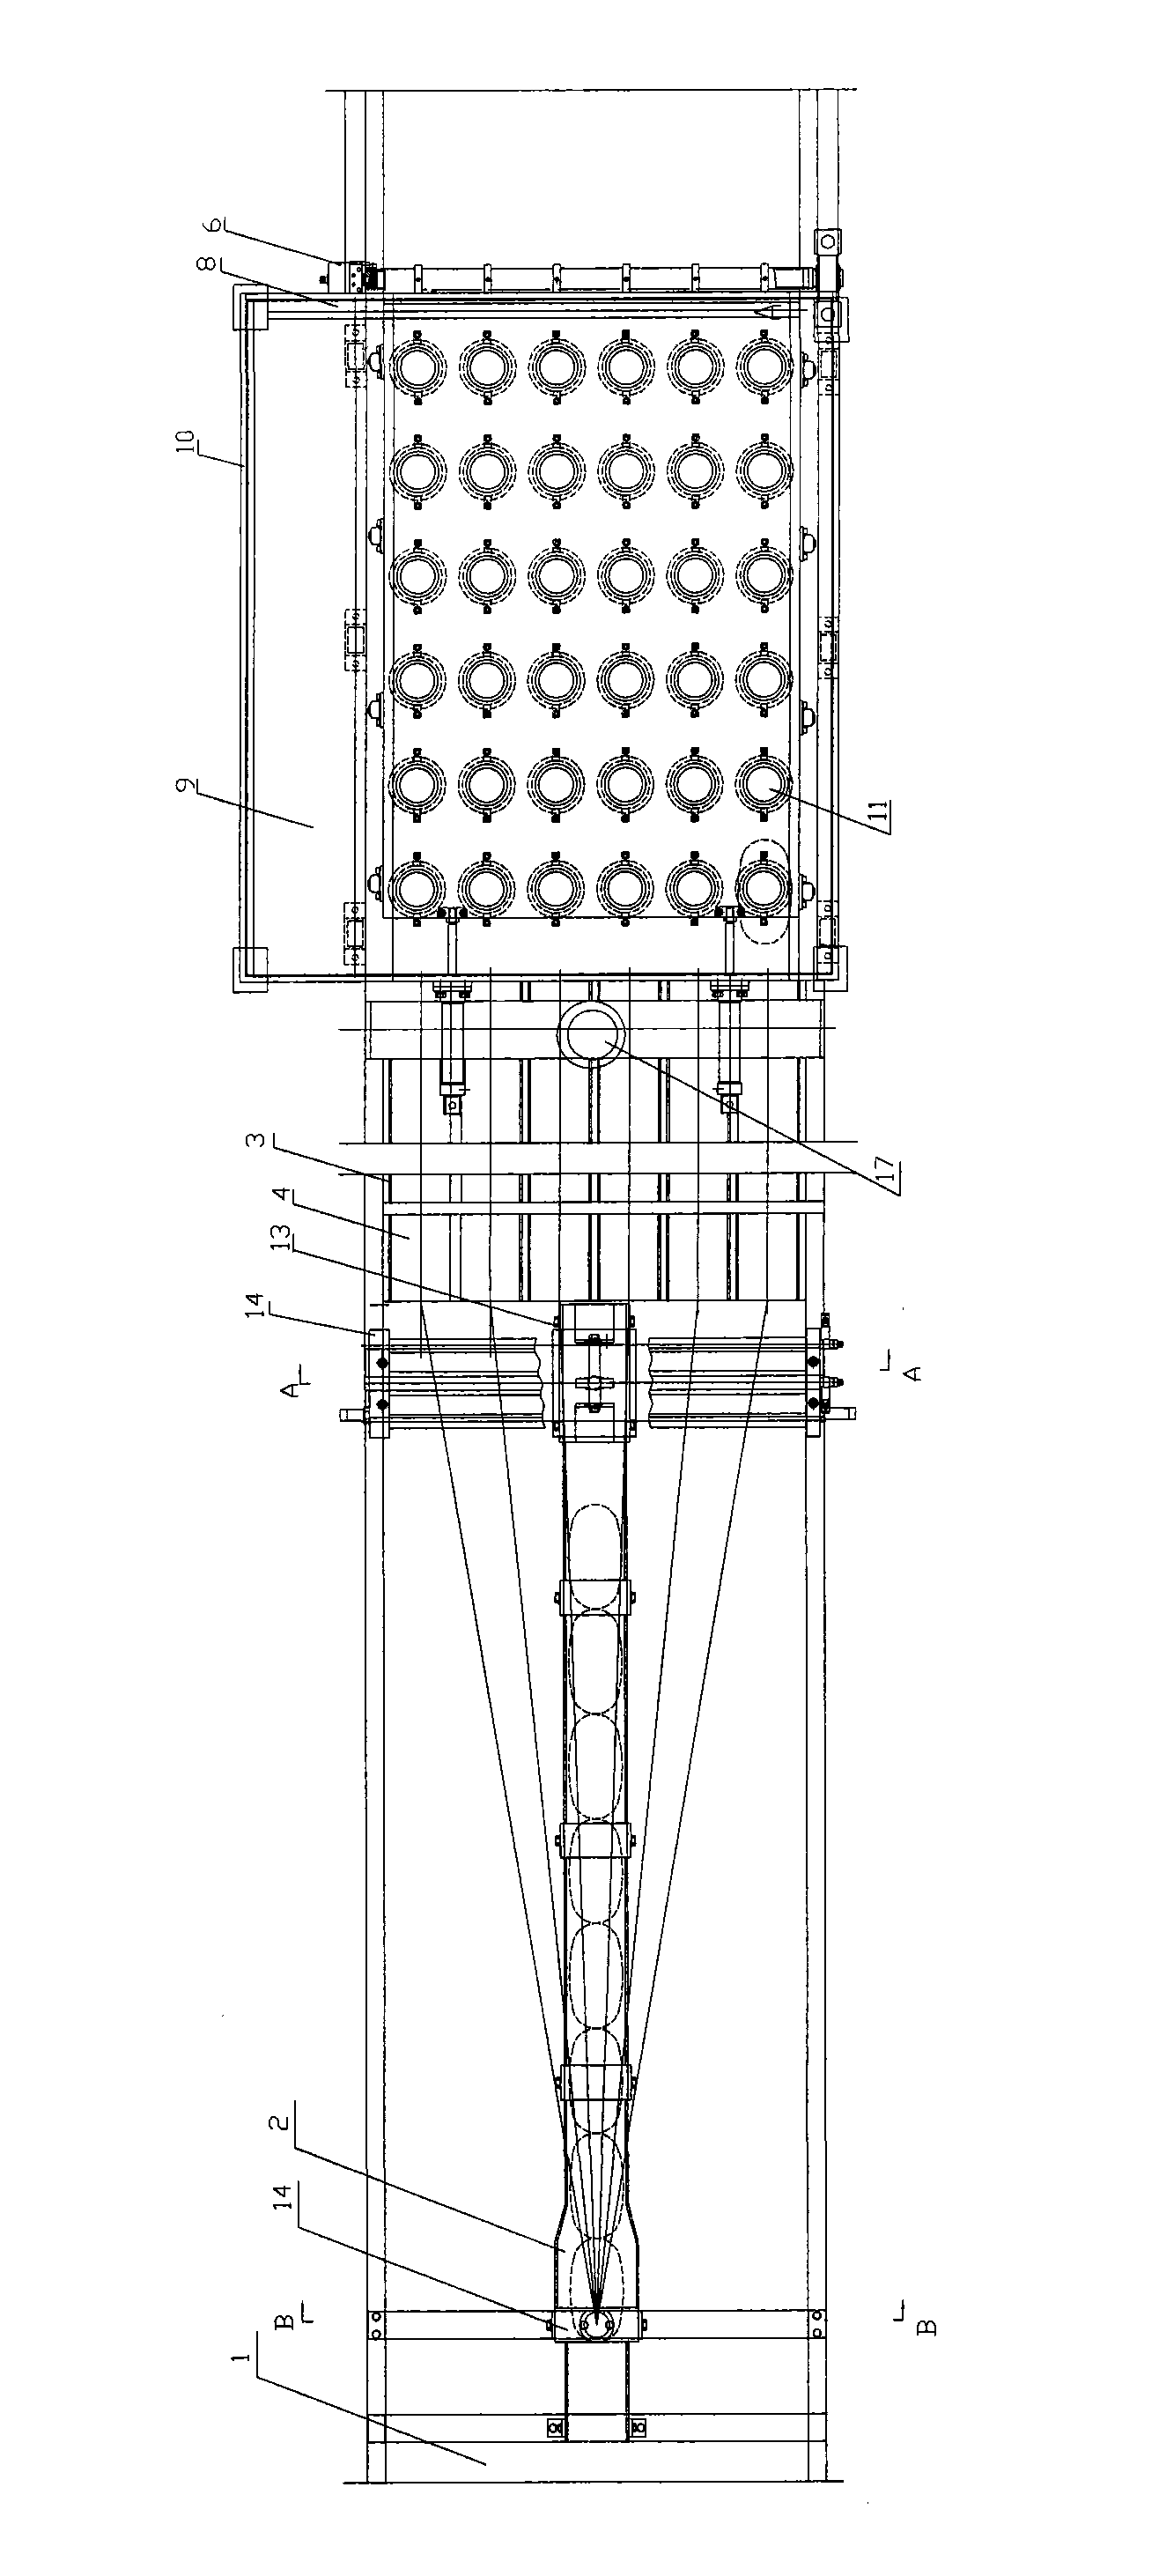 Method and device for continuously and automatically metering irregular cans of canned goods and filling lobster sauces